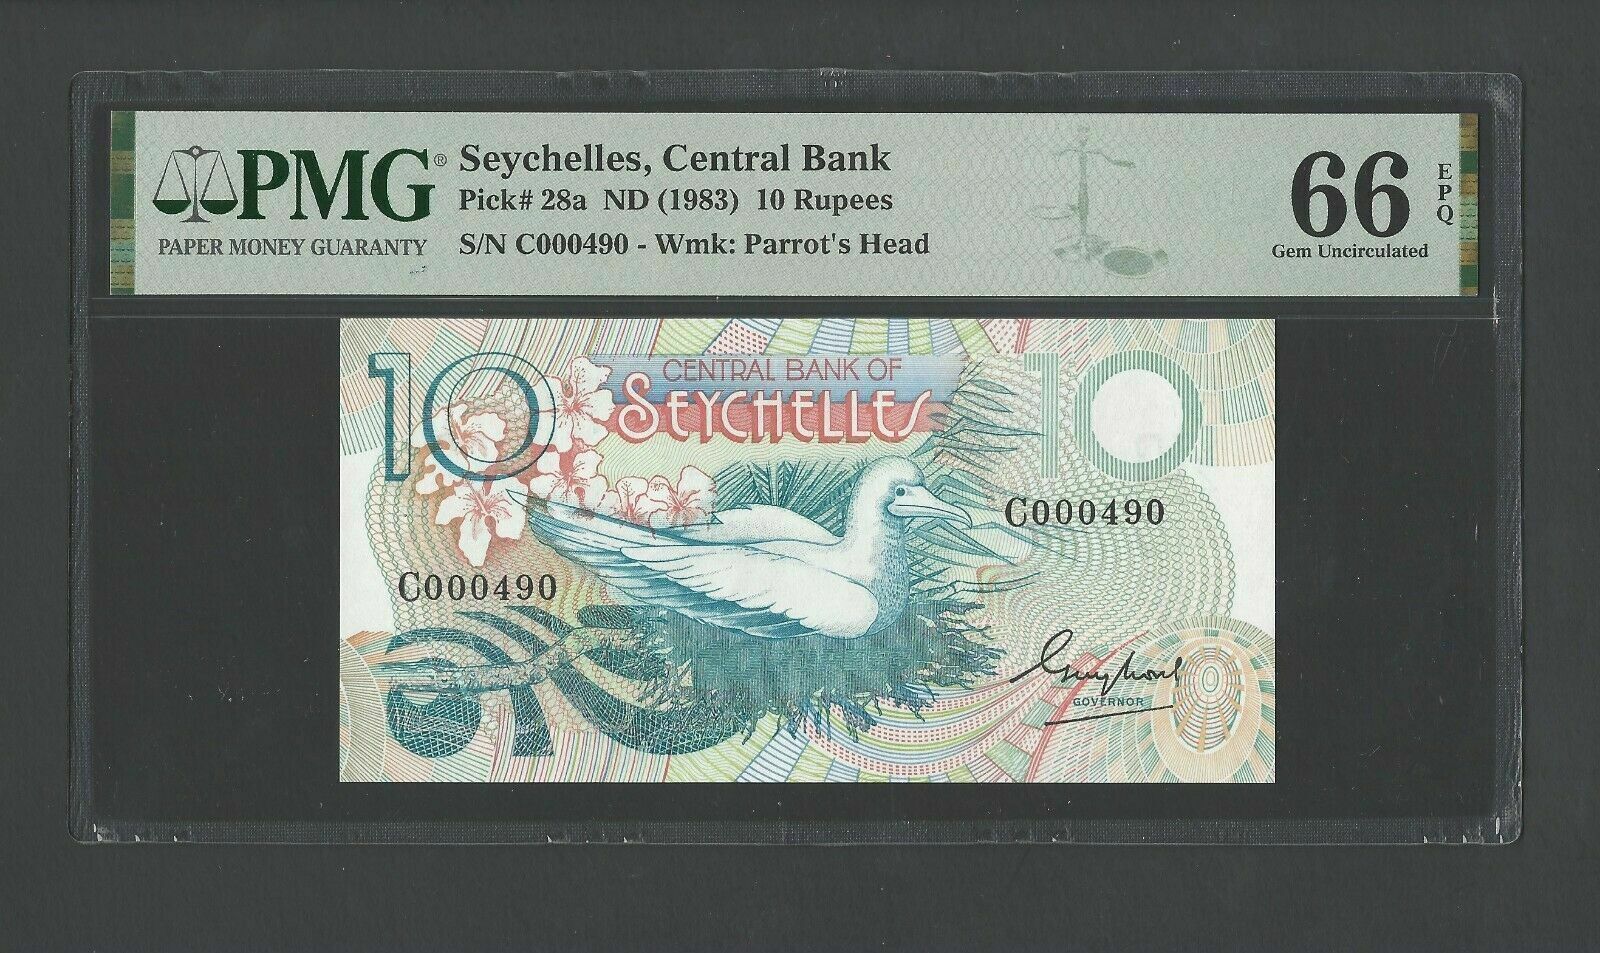 Seychelles 10 Rupees Nd(1983) P28a "s/n 000490" Uncirculated Grade 66